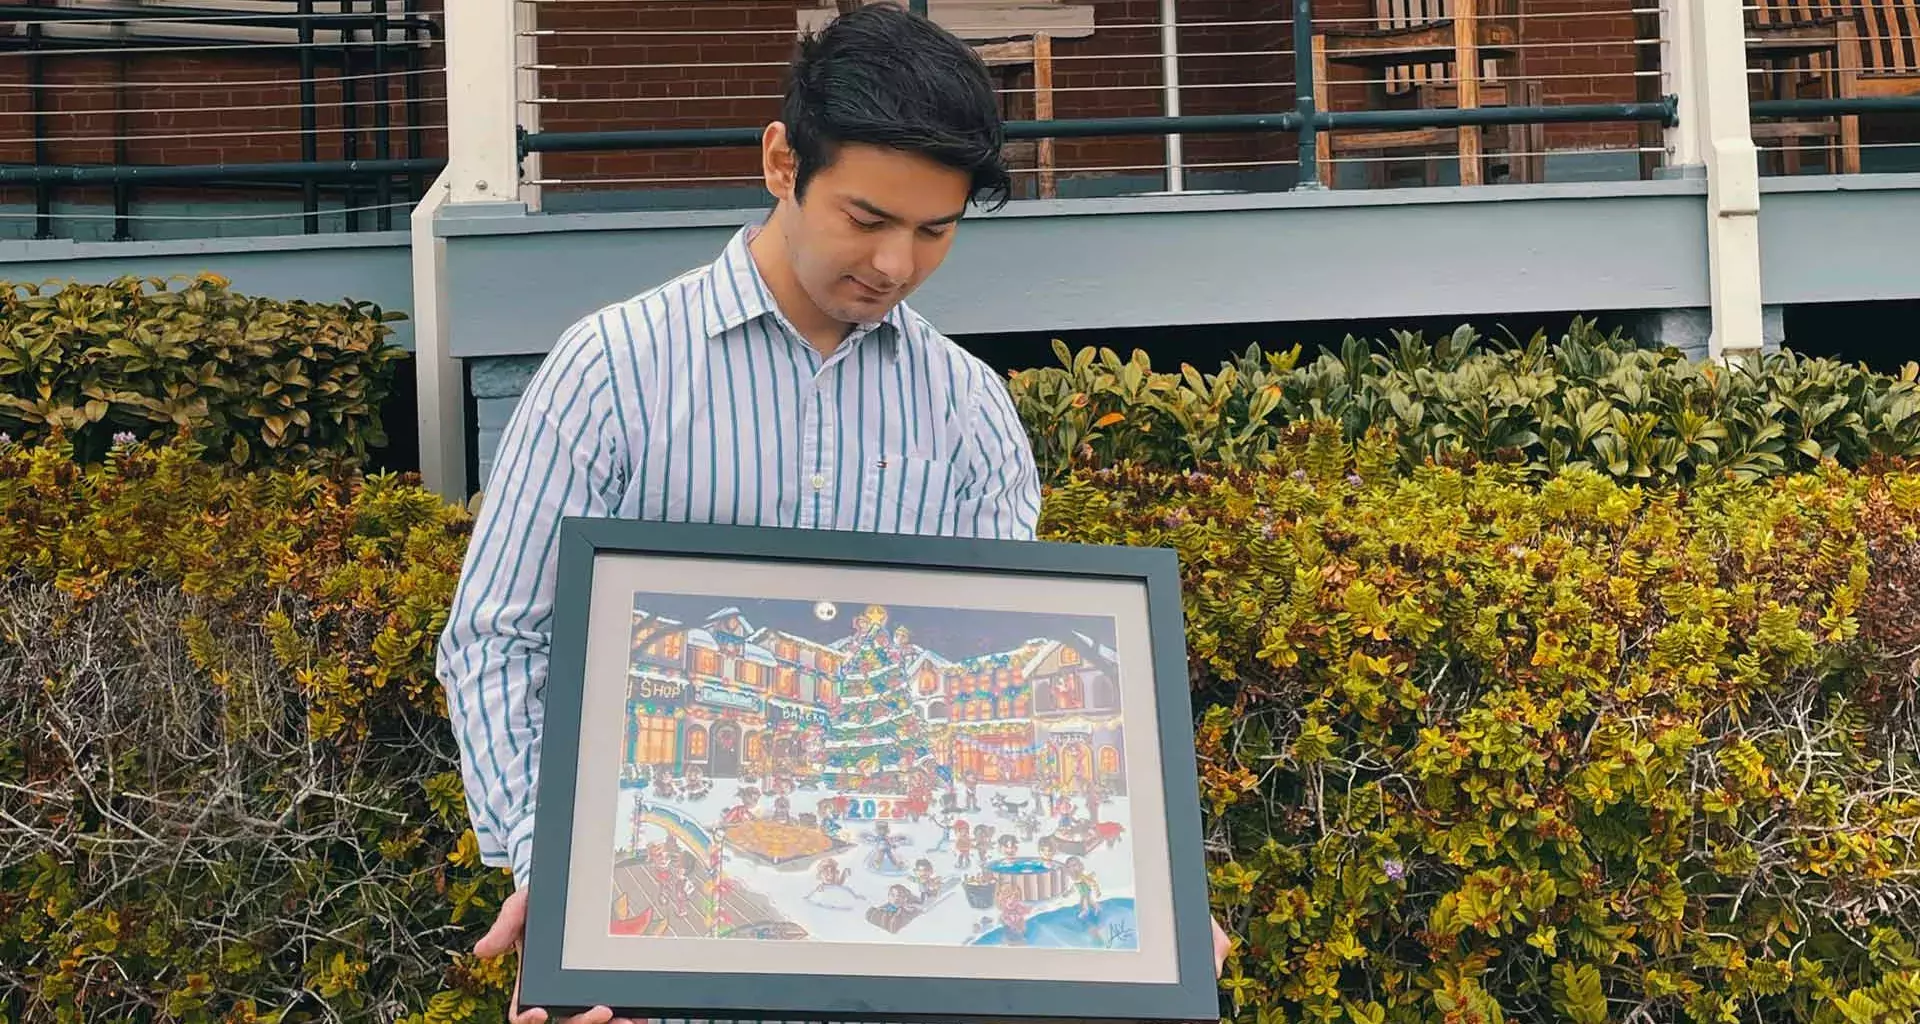 Alex Carrillo presents two of his works in the Spirit of the Season exhibit at the Walt Disney Family Museum